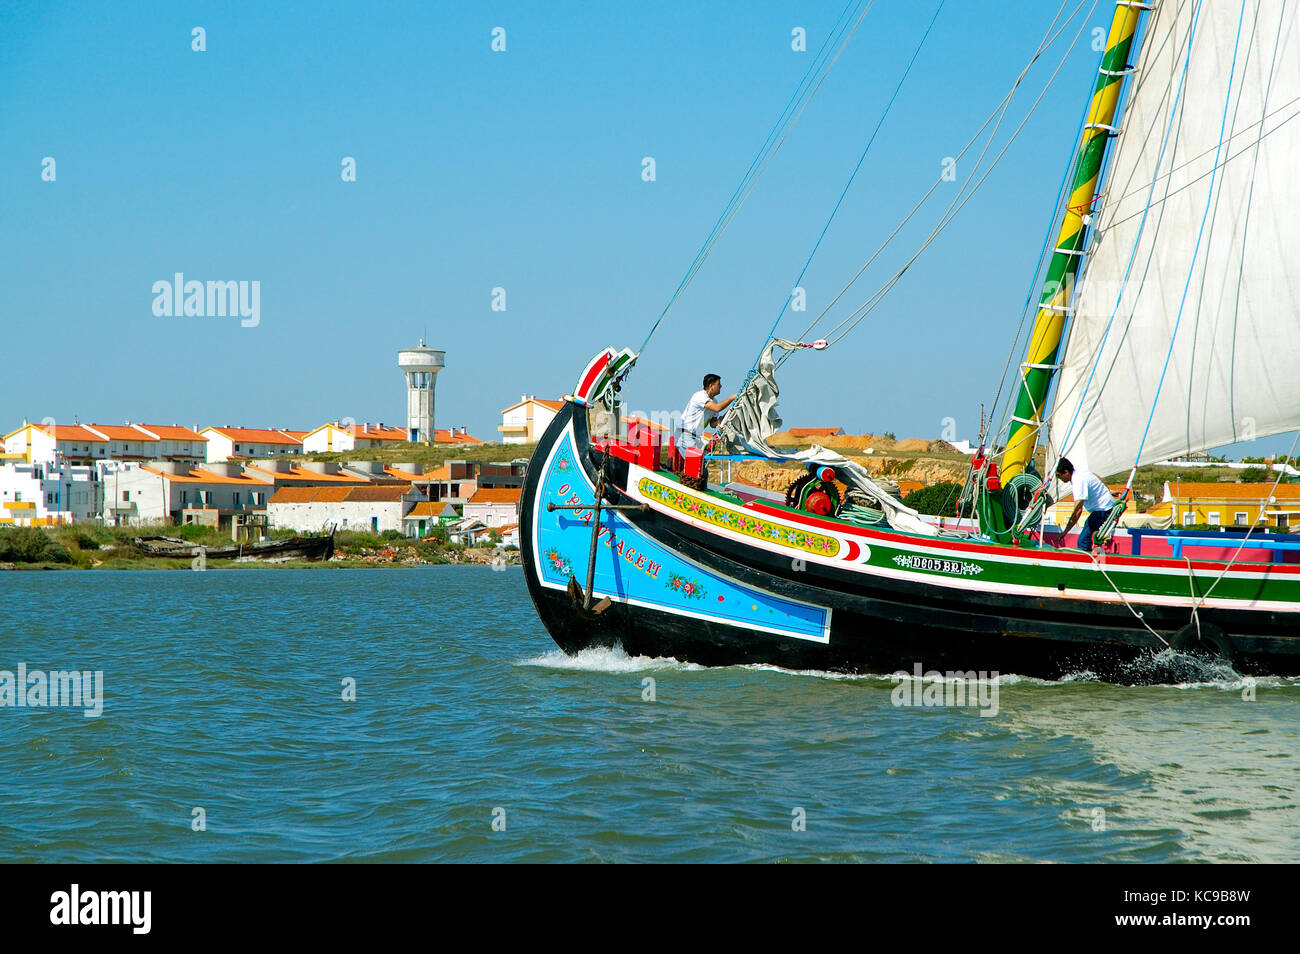 Traditional boat sailing in the Tagus river. Portugal Stock Photo